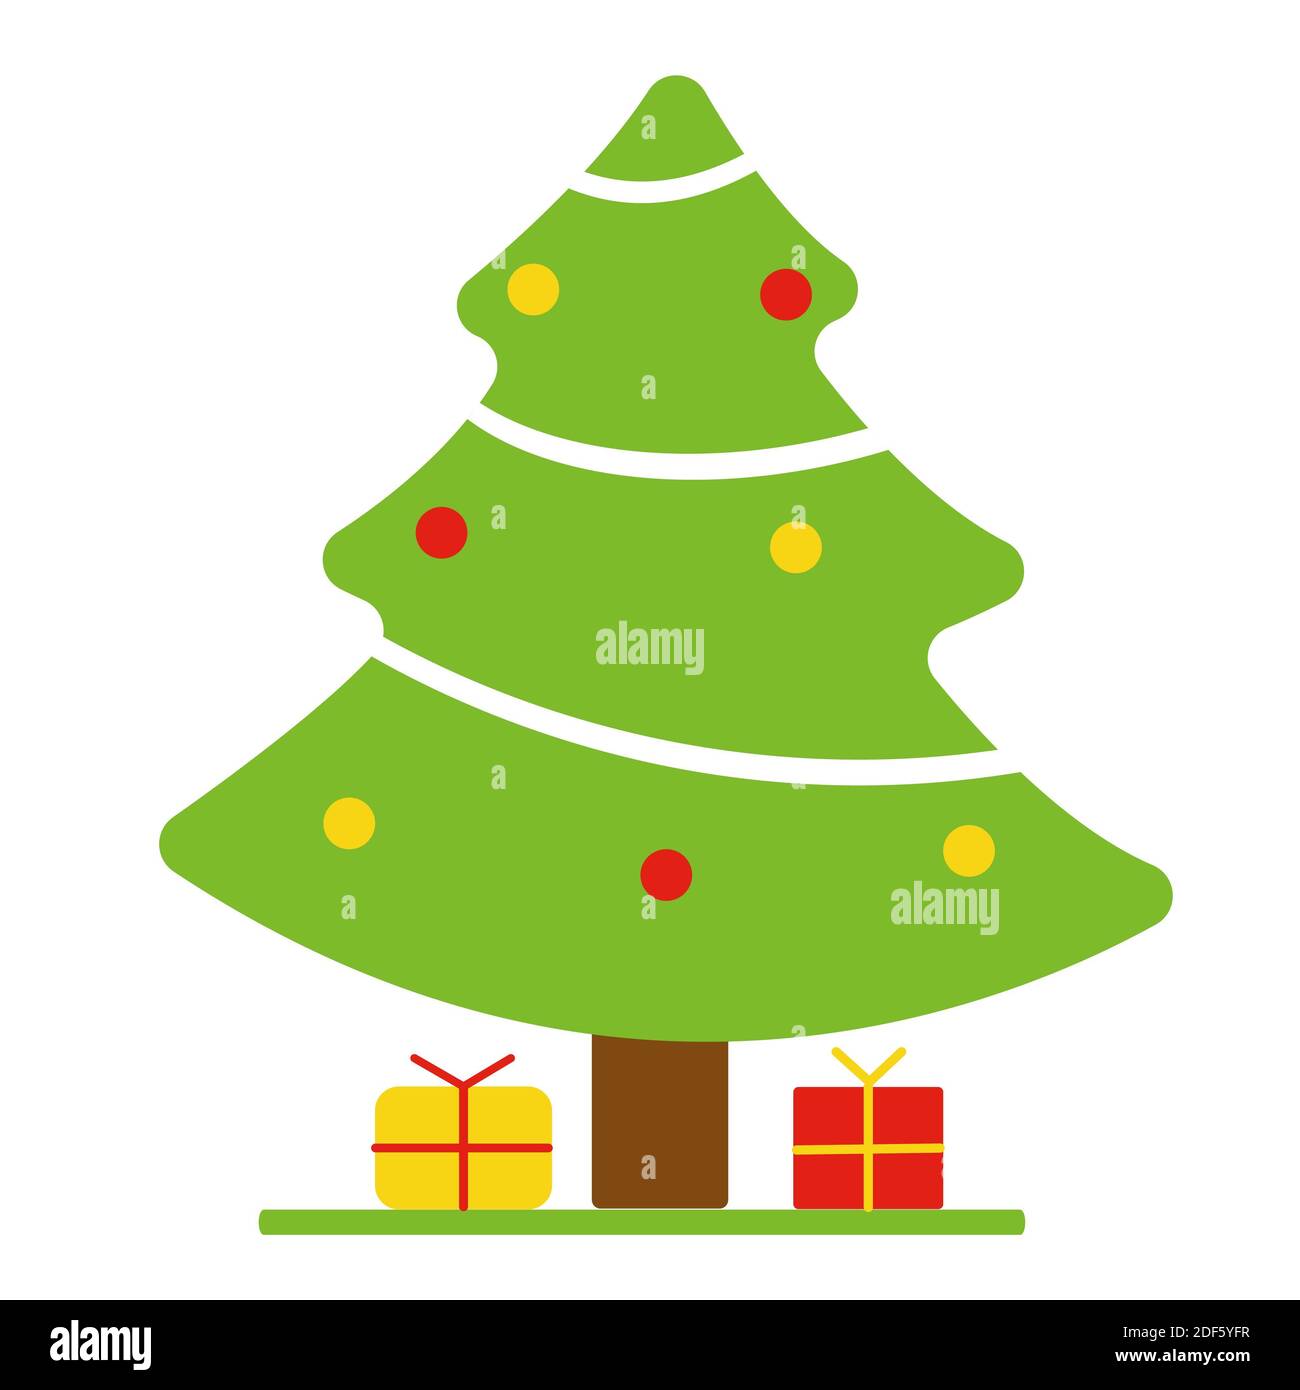 Christmas vector illustration of christmas tree with red and yellow presents. Christmas icon tree in flat design Stock Photo